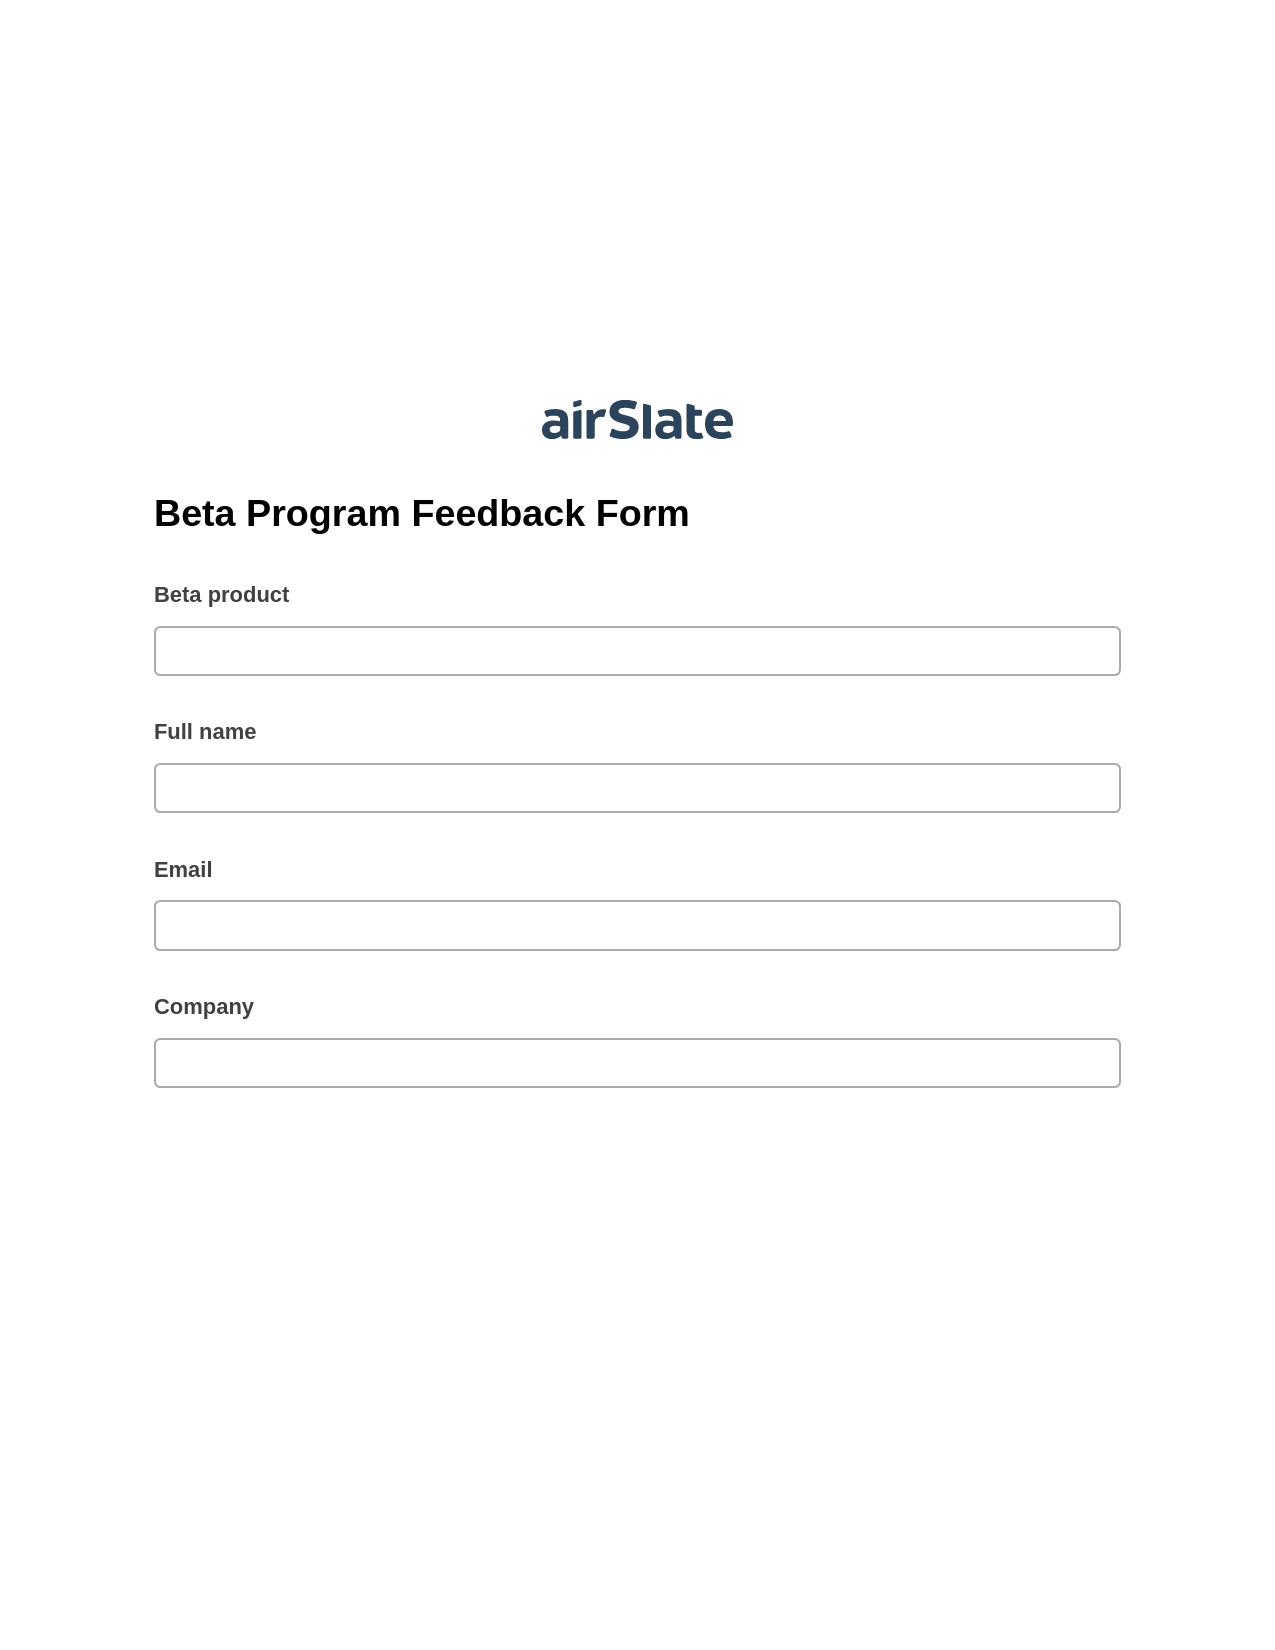 Beta Program Feedback Form Pre-fill from Google Sheets Bot, Export to MS Dynamics 365 Bot, Post-finish Document Bot